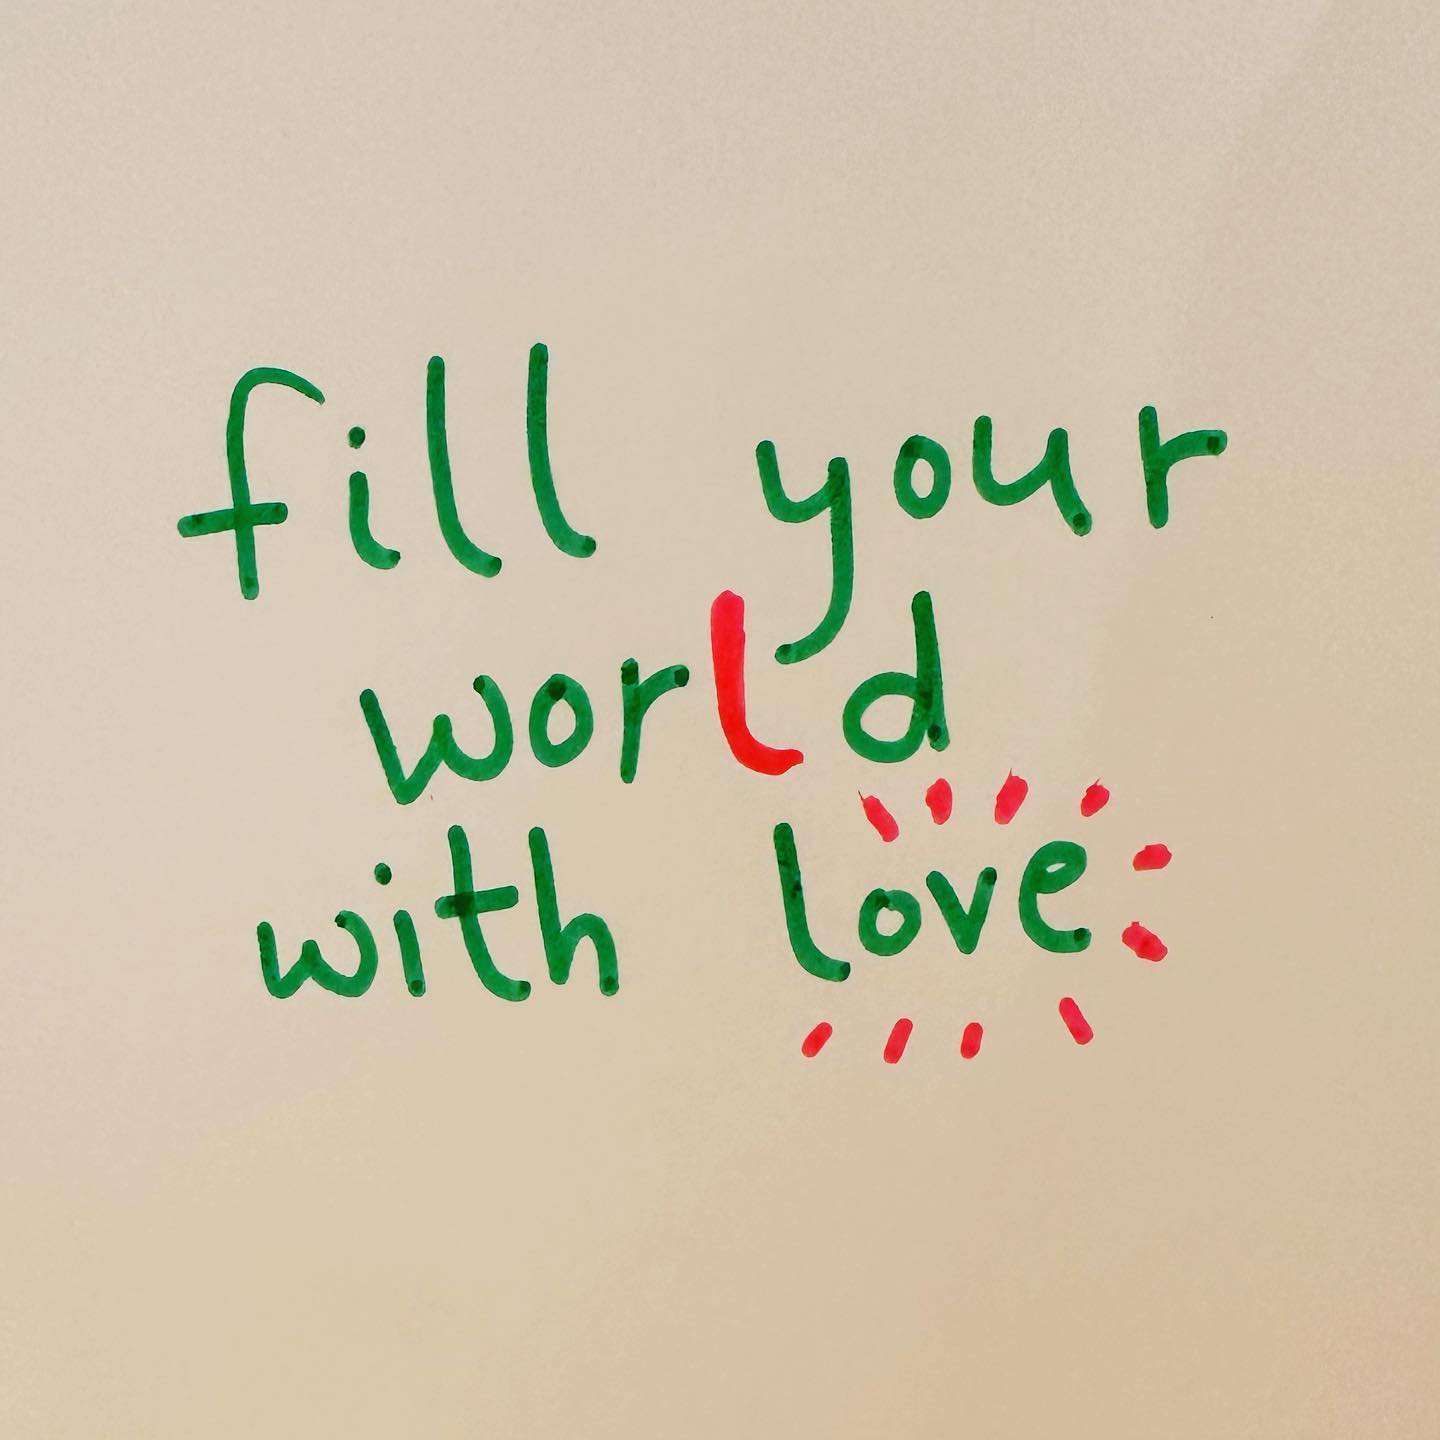 If you want to create a world that you’ll love, fill your word with love, fill it with kindness, fill it with care. Change the word, the inner and the outer. Change the world, the inner and the outer.
@goodlifeproject